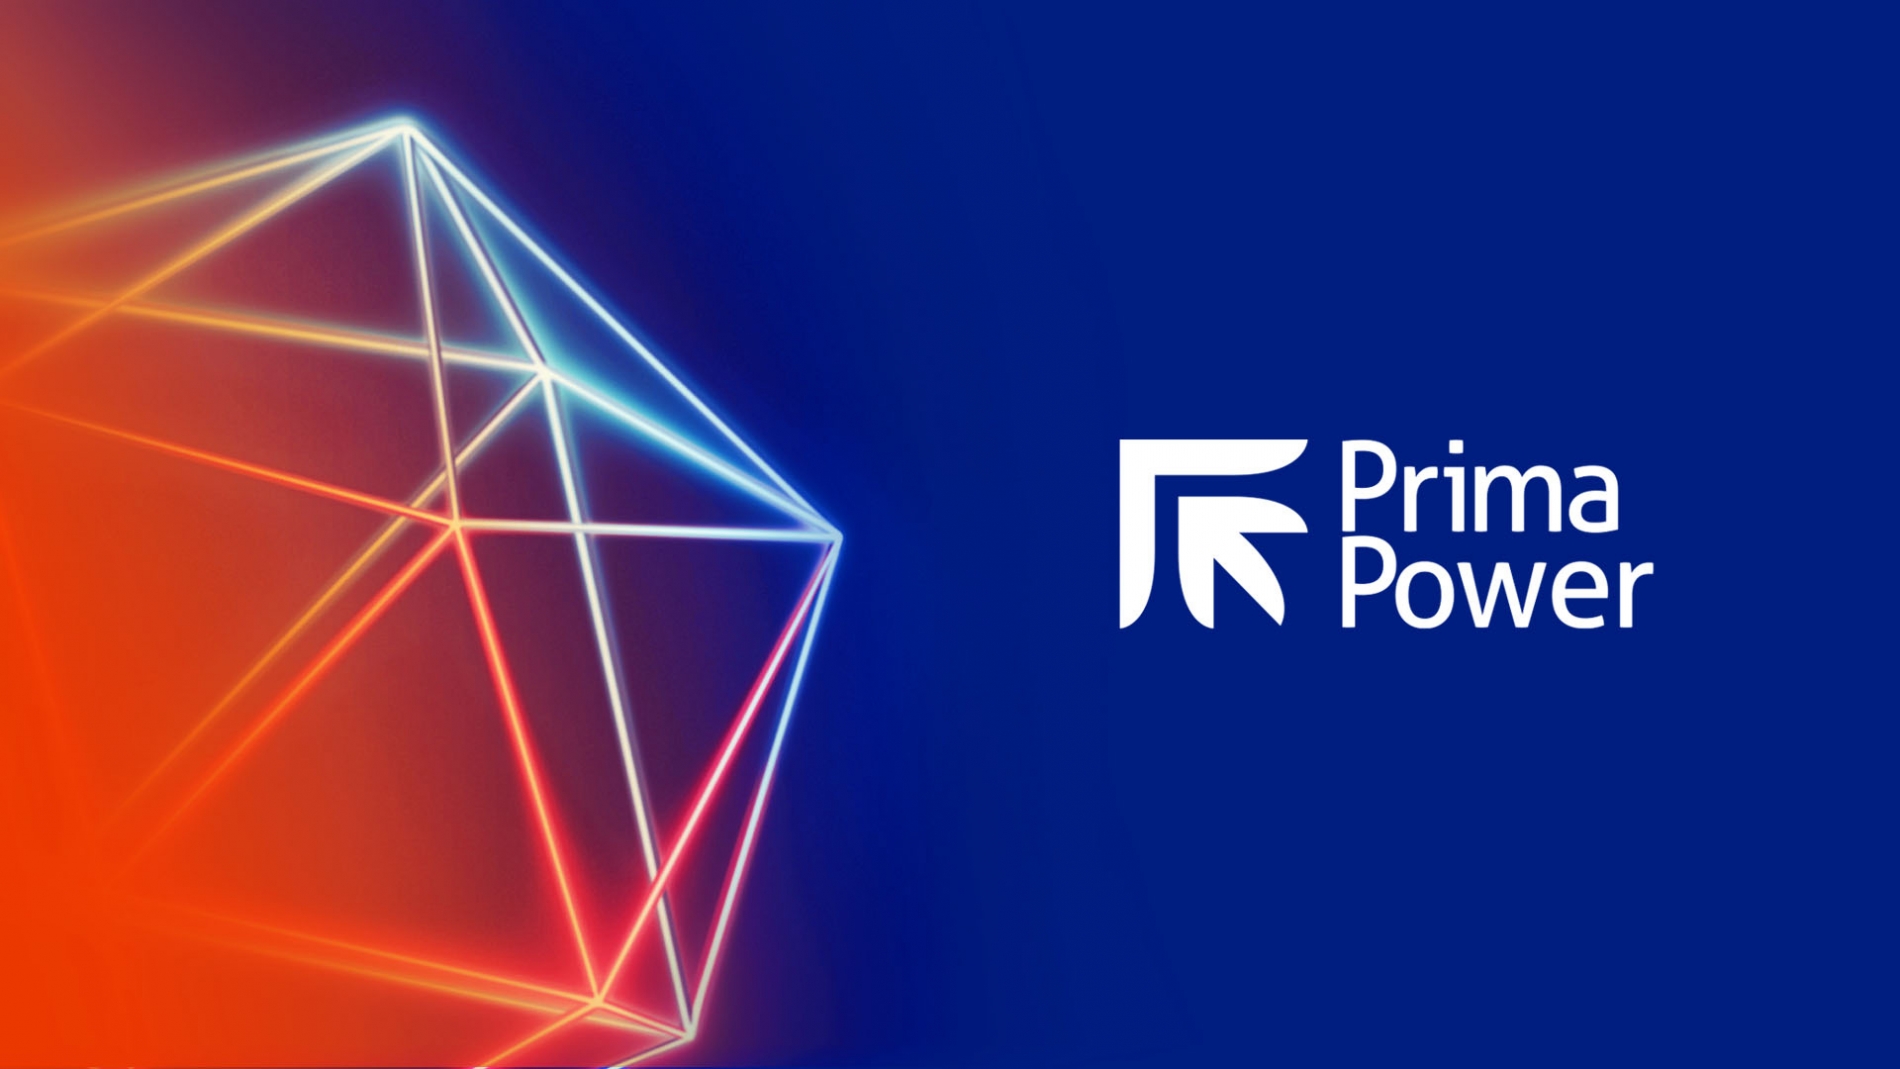 Prima Power returns with new solutions on all sides